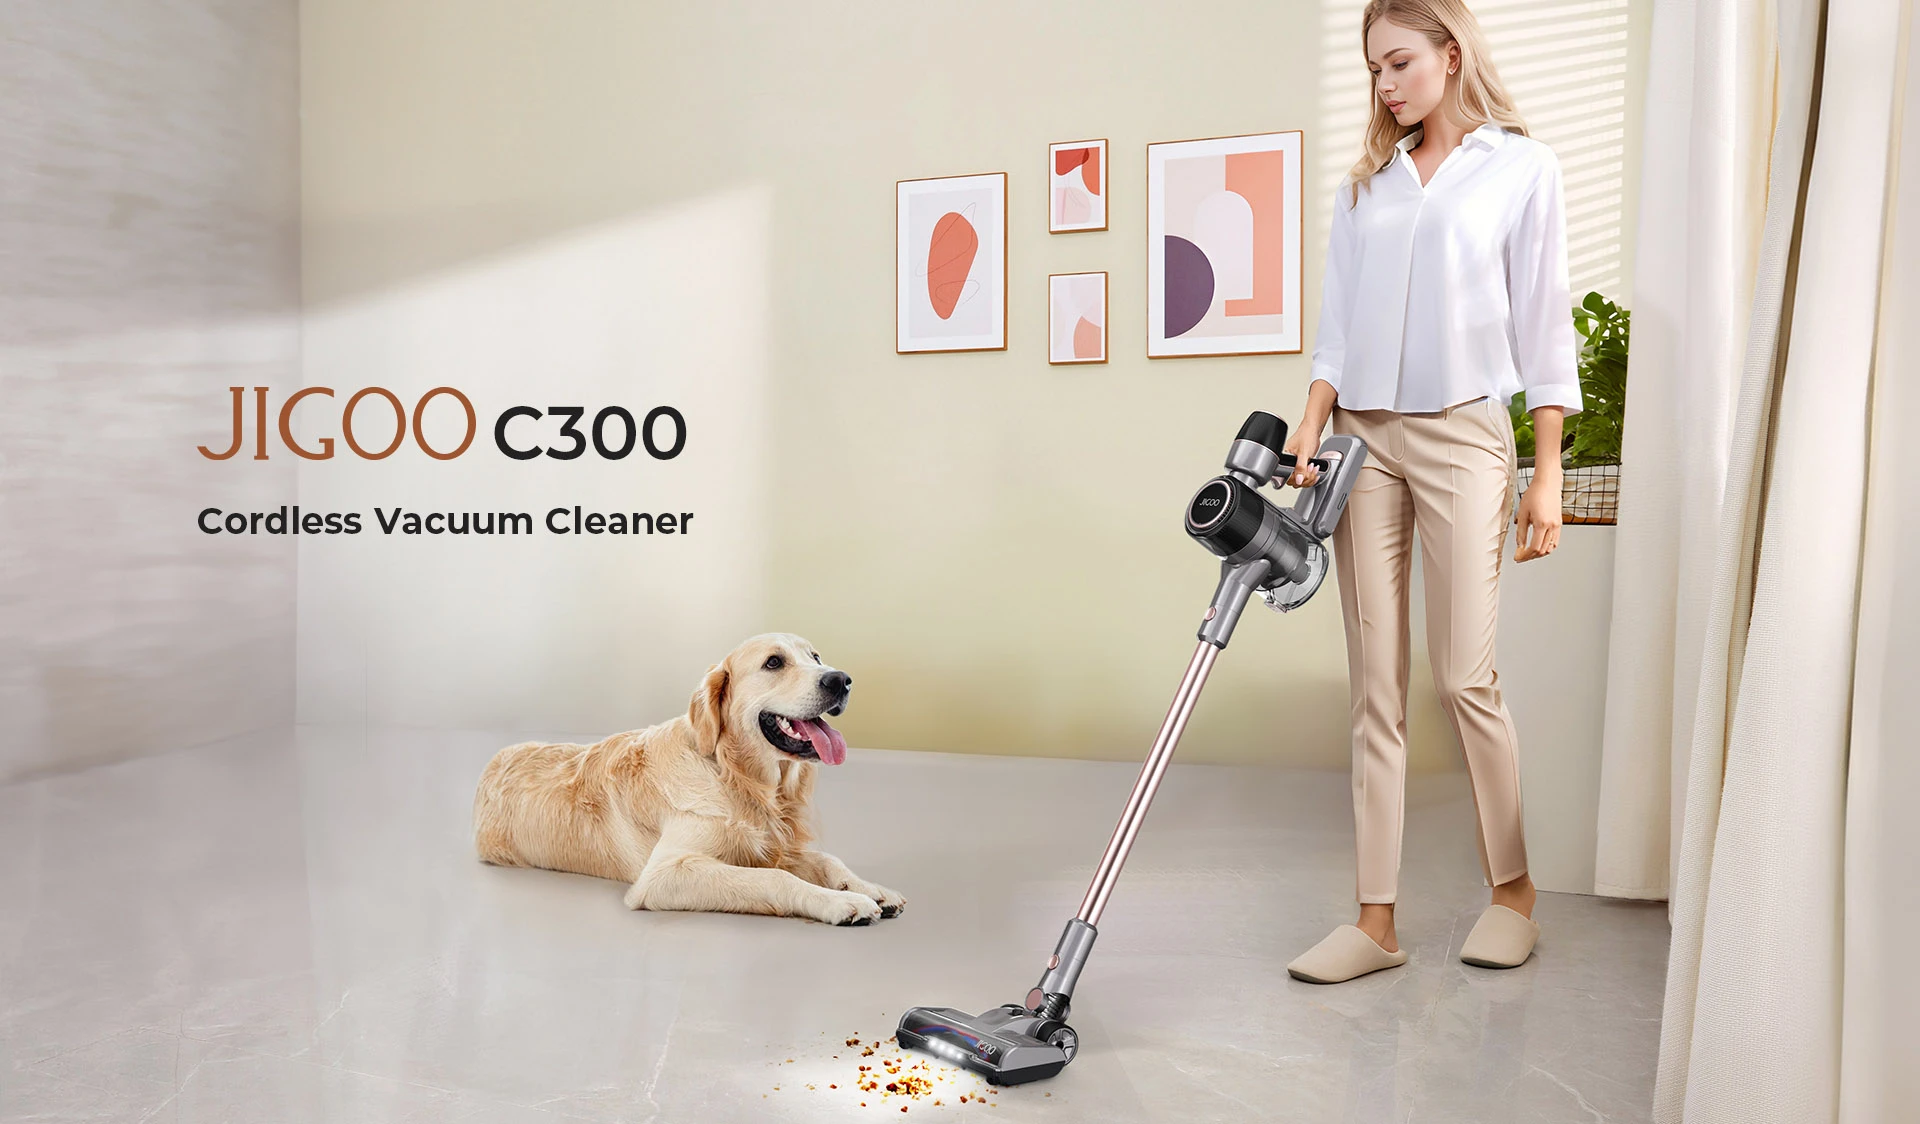 JIGOO C300 Cordless Vacuum Cleaner, 30KPa Suction, 400W Motor, 1.2L Dust Bowl, 5-Stage Filtration, Hanggang 45 Minutes Run Time, 2000mAh Removable Battery, LED Touch Screen, Rotating Metal Tube